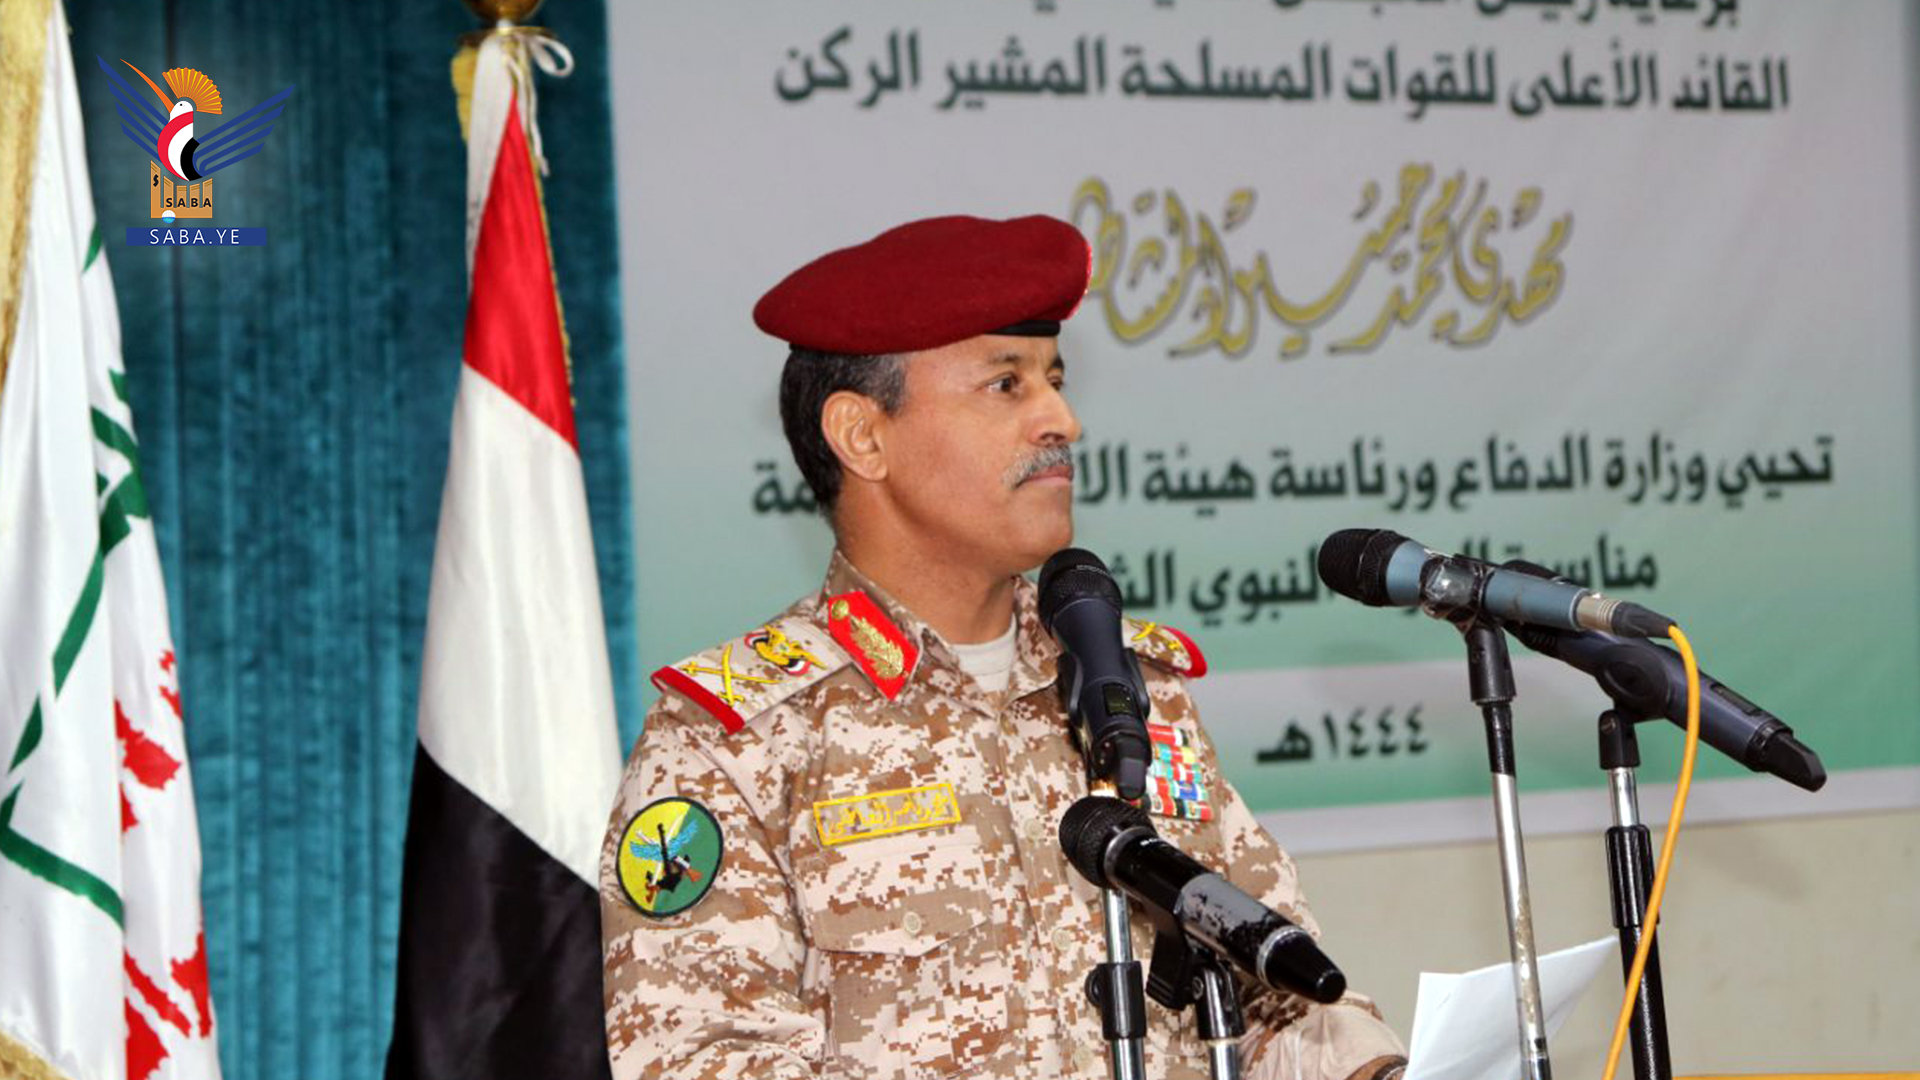 Defense Minister: Lands, waters, seas, resources of Republic of Yemen are basis of sovereignty